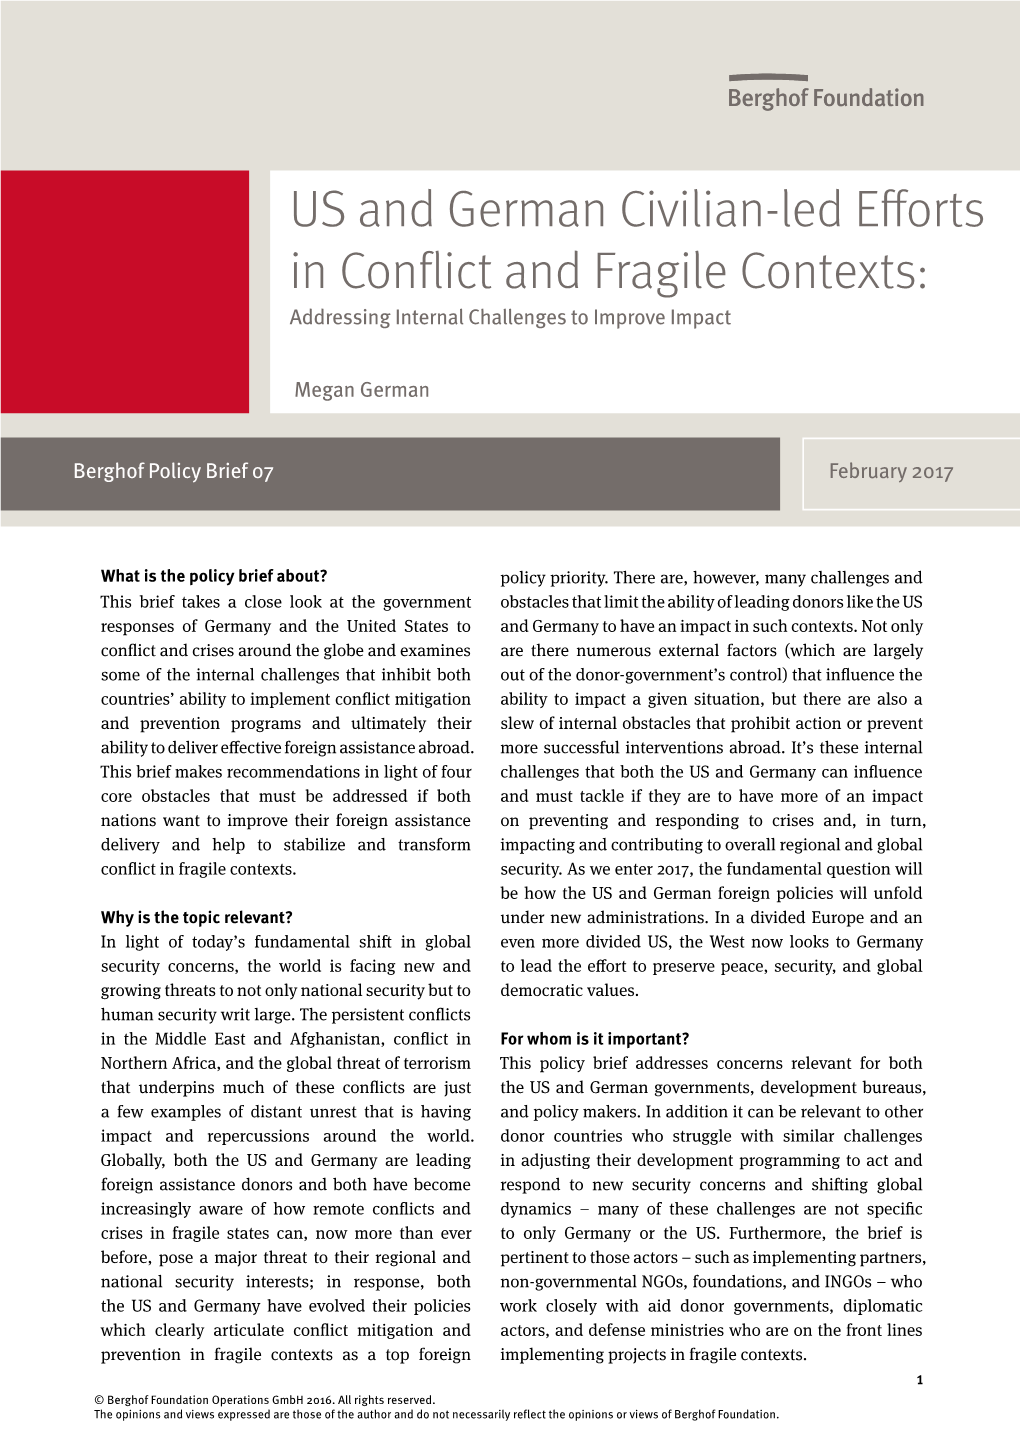 US and German Civilian-Led Efforts in Conflict and Fragile Contexts